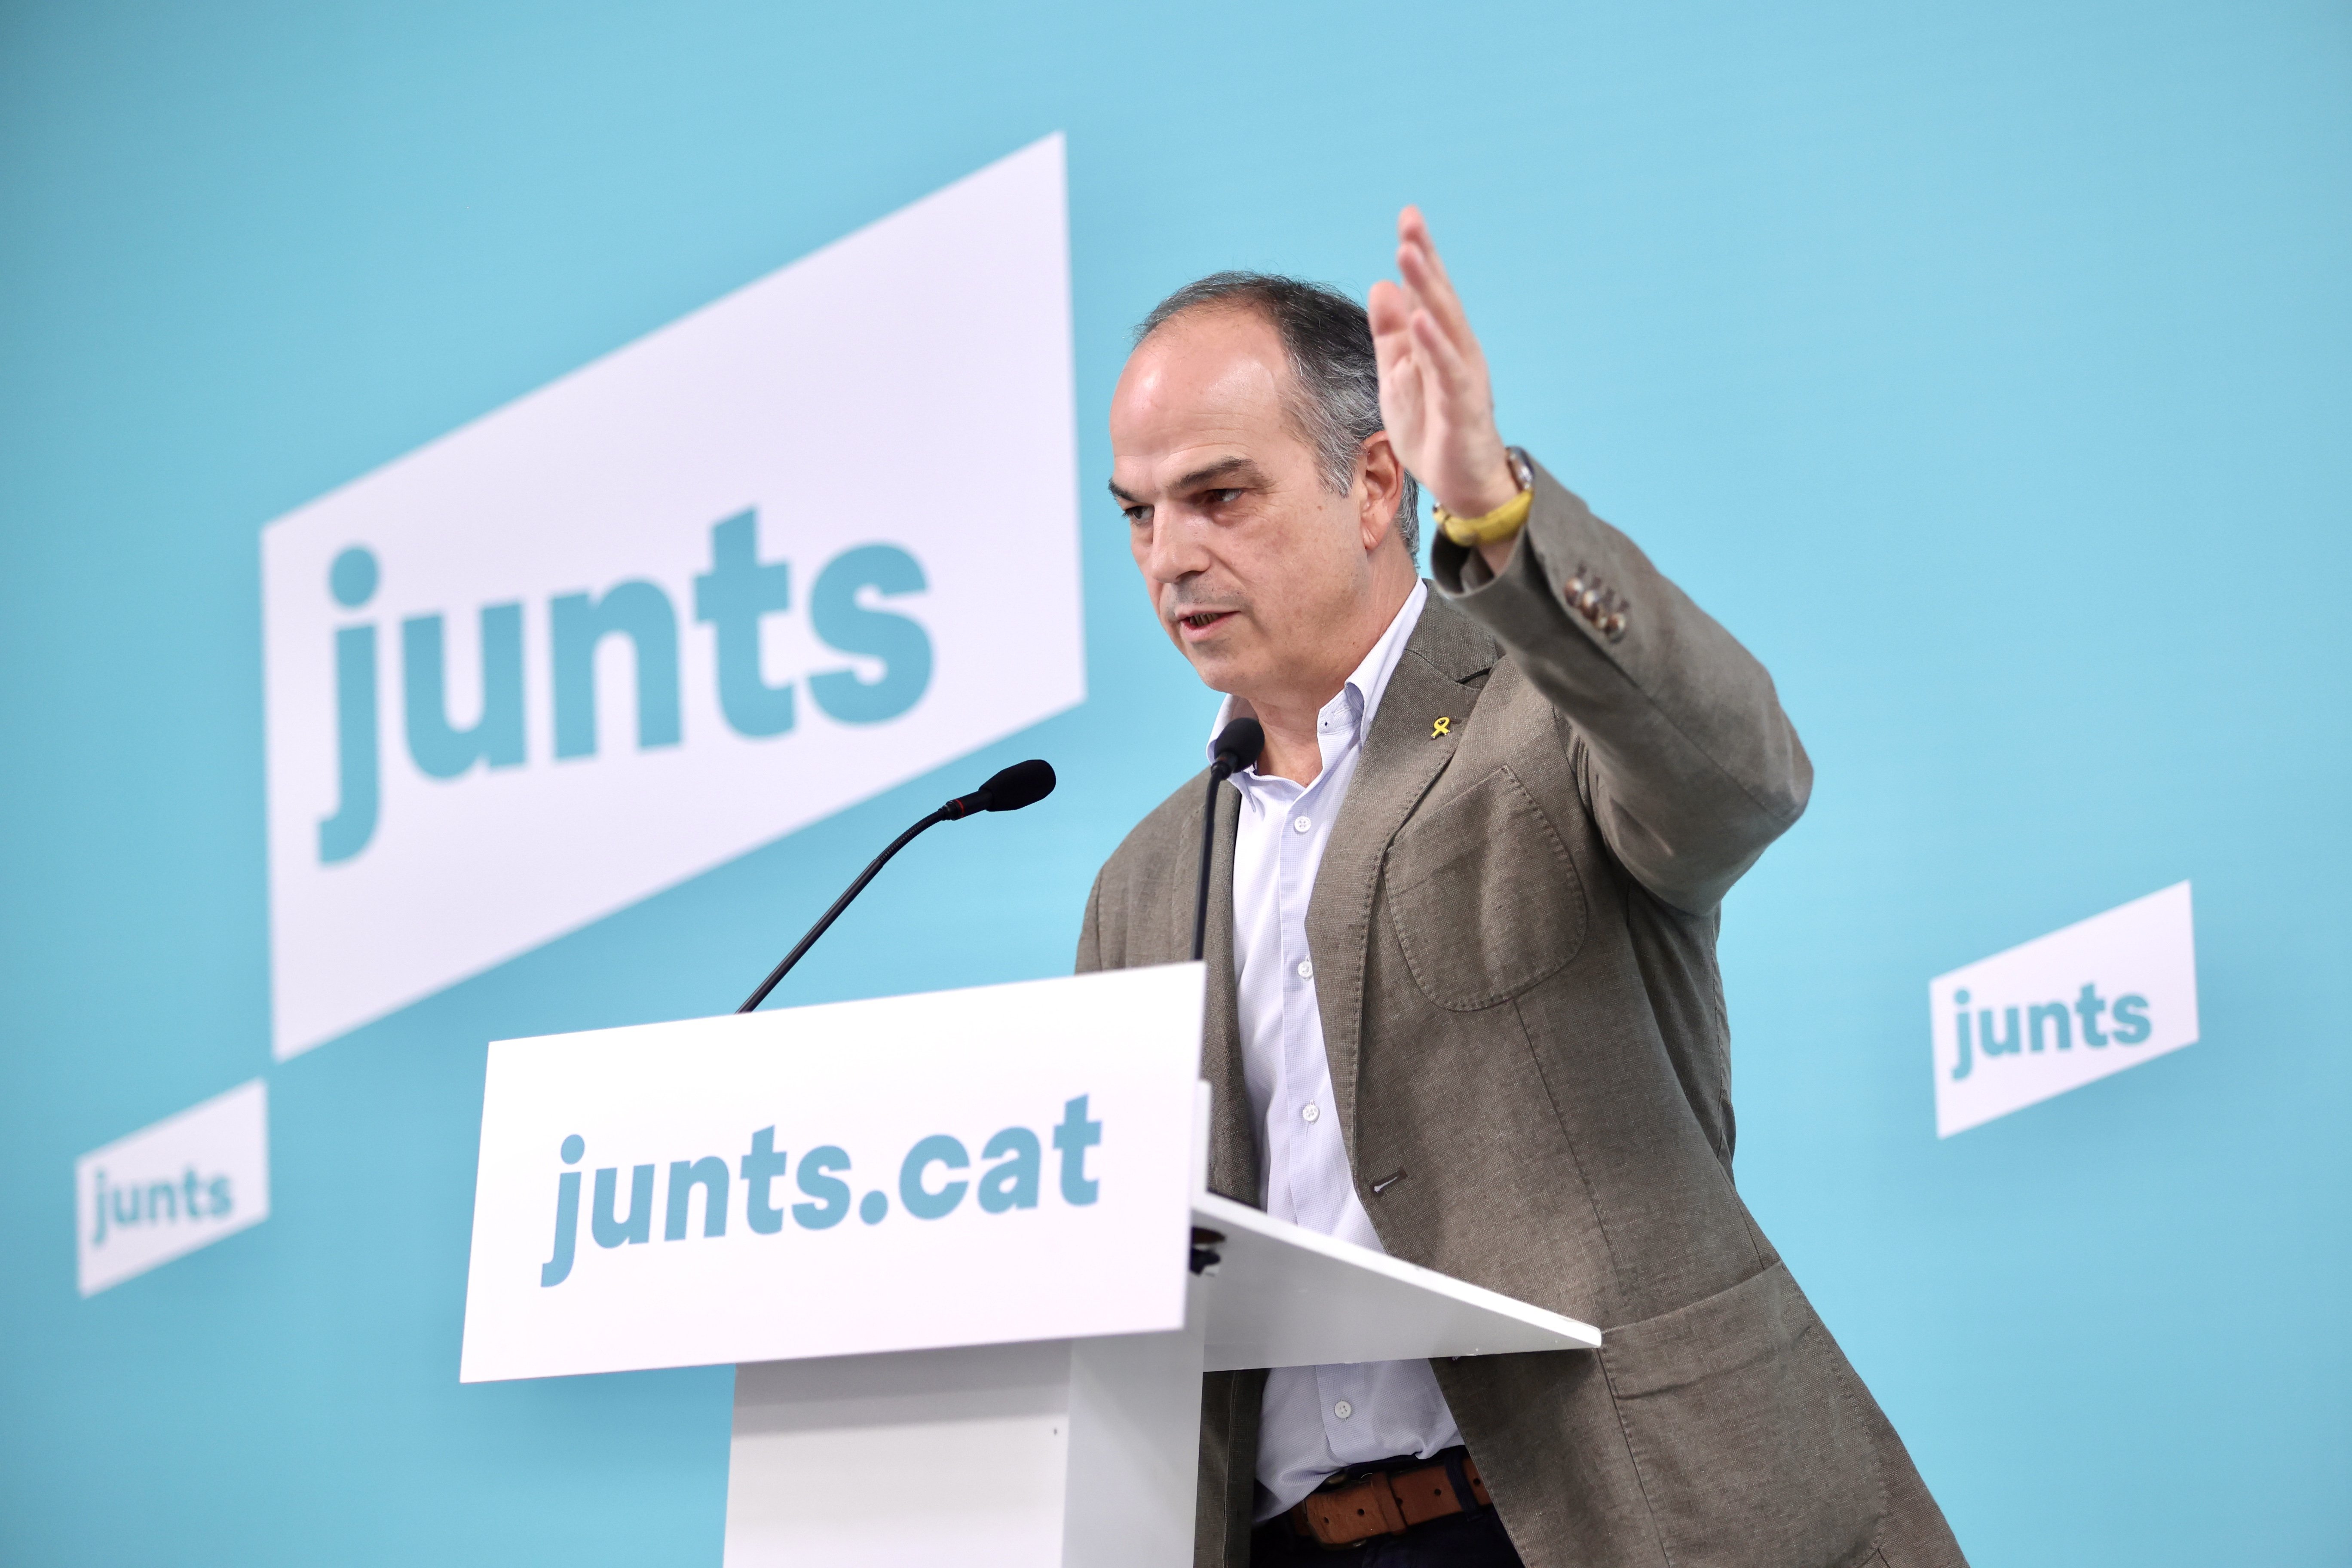 Should we stay or should we go? Turull presents precise question for Junts members